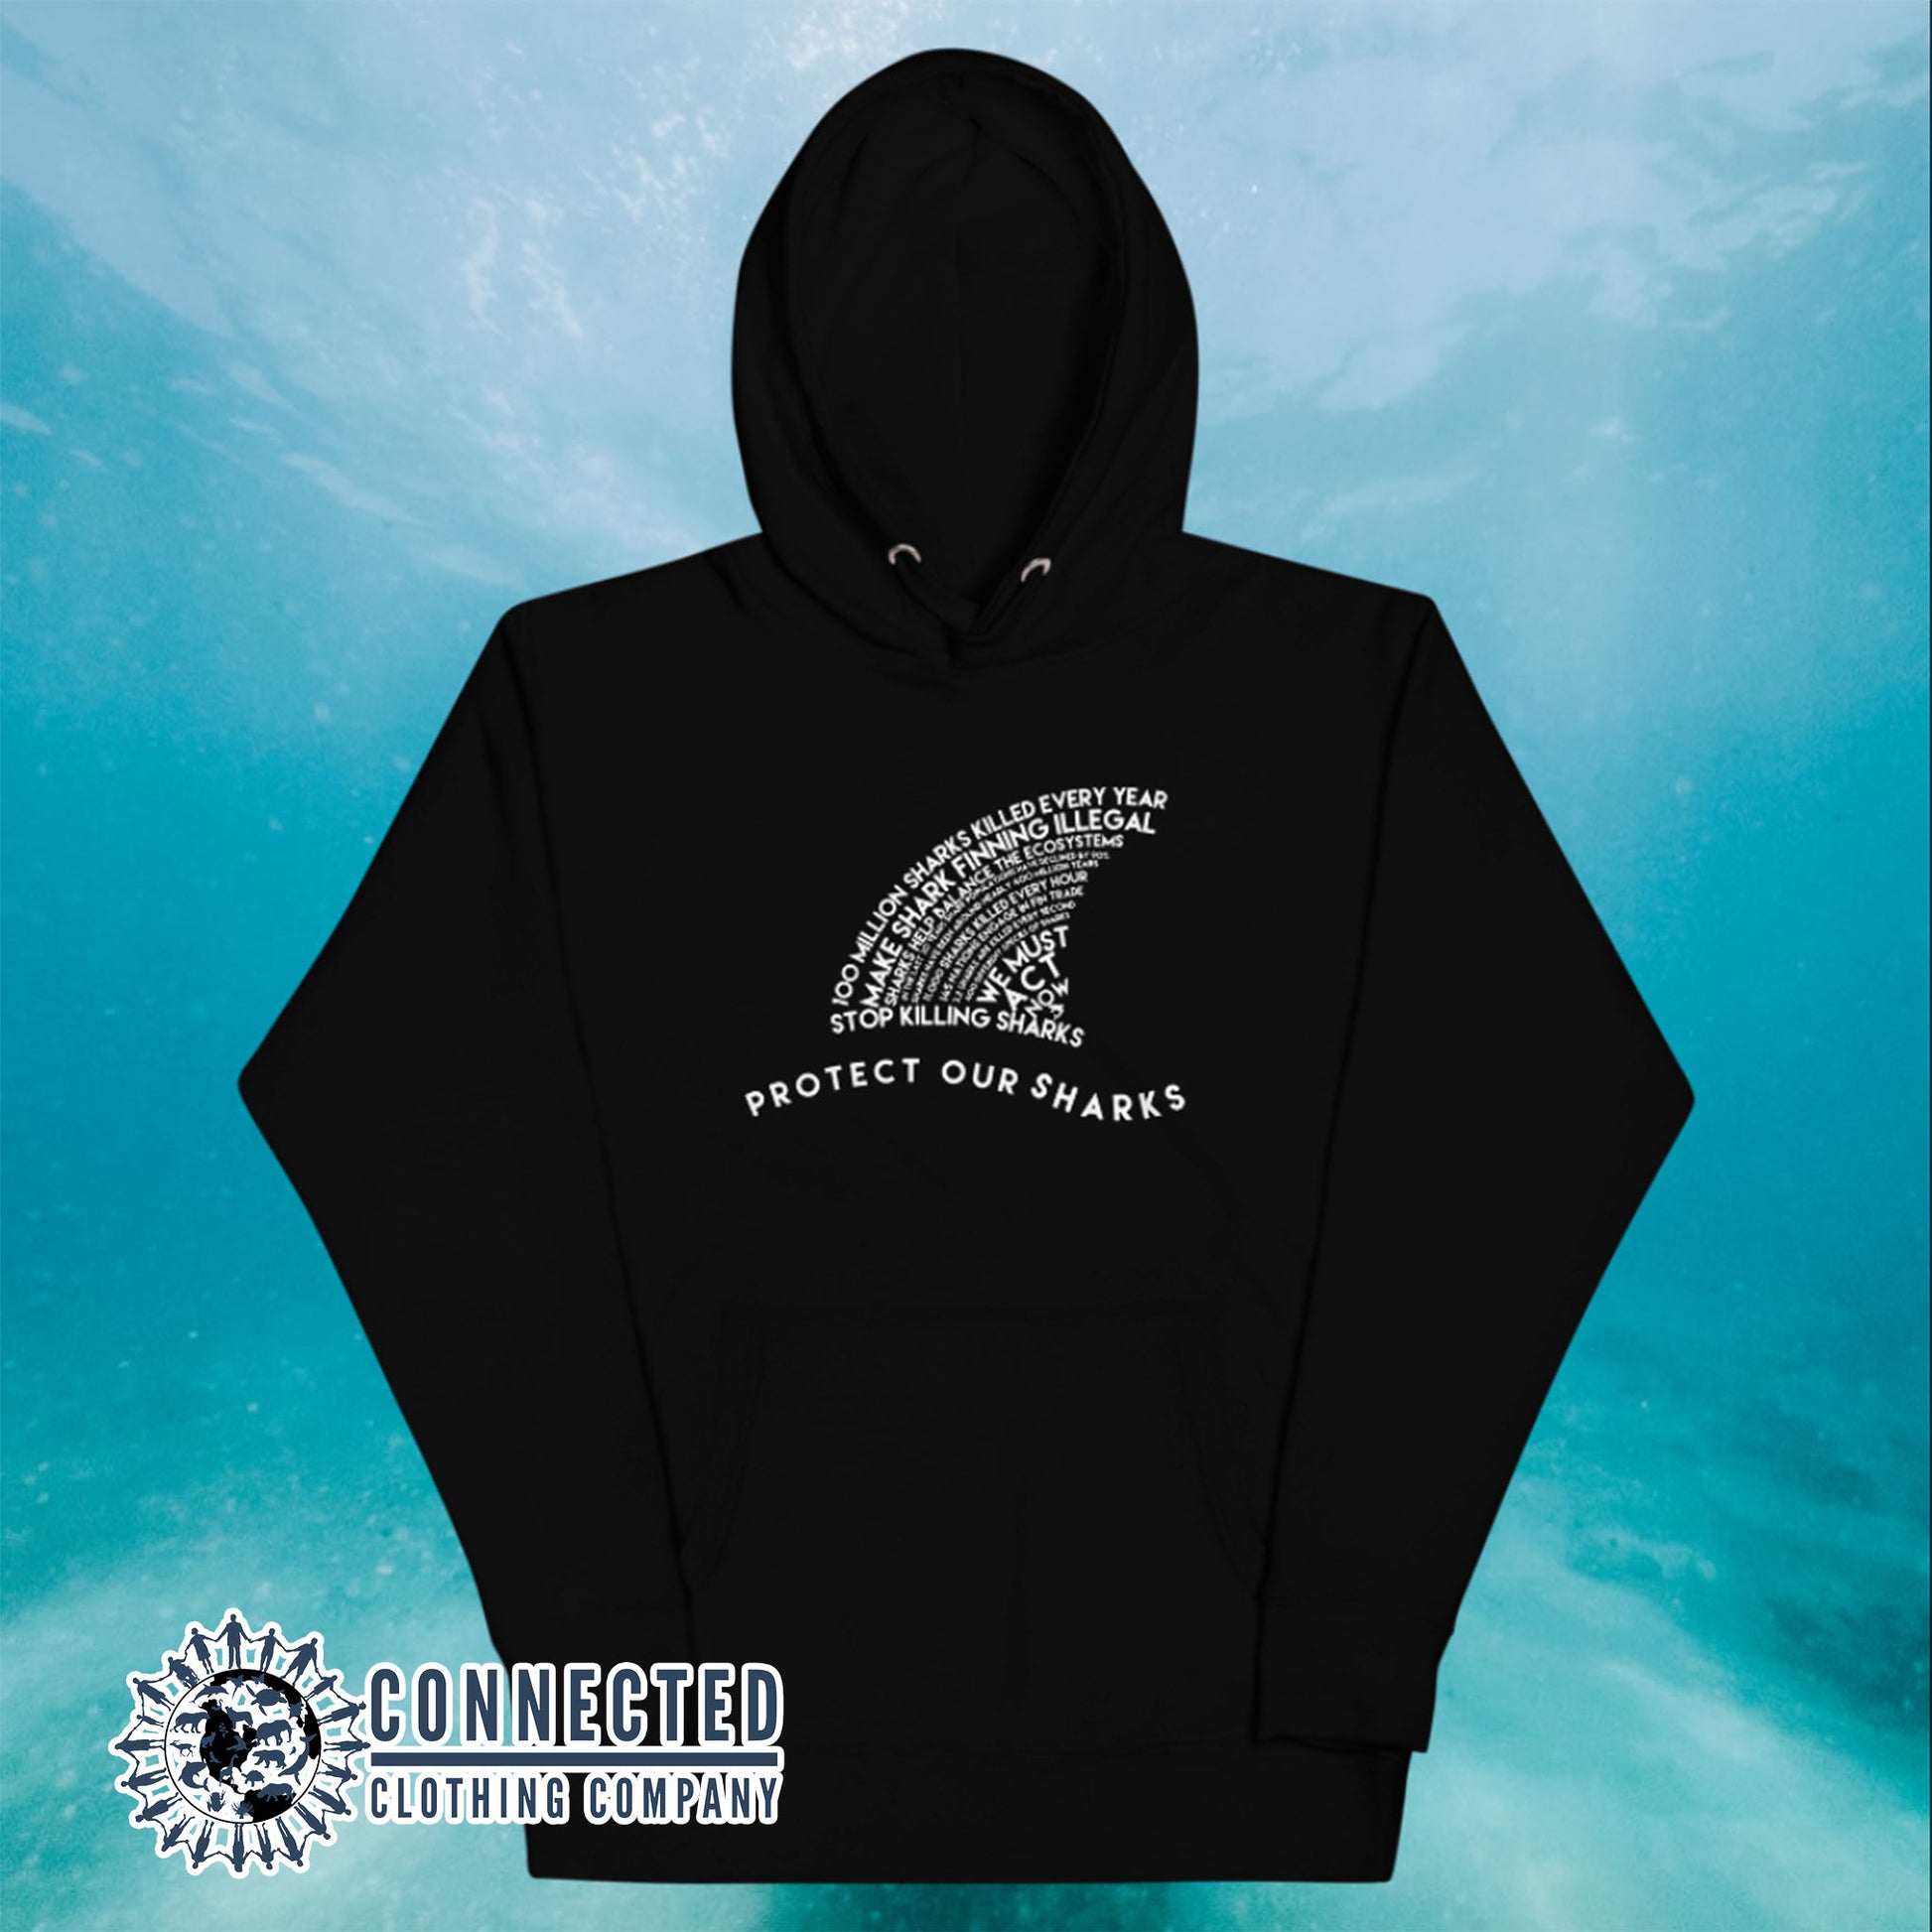 Black Protect Our Sharks Unisex Hoodie - Connected Clothing Company - Ethically and Sustainably Made - 10% donated to Oceana shark conservation